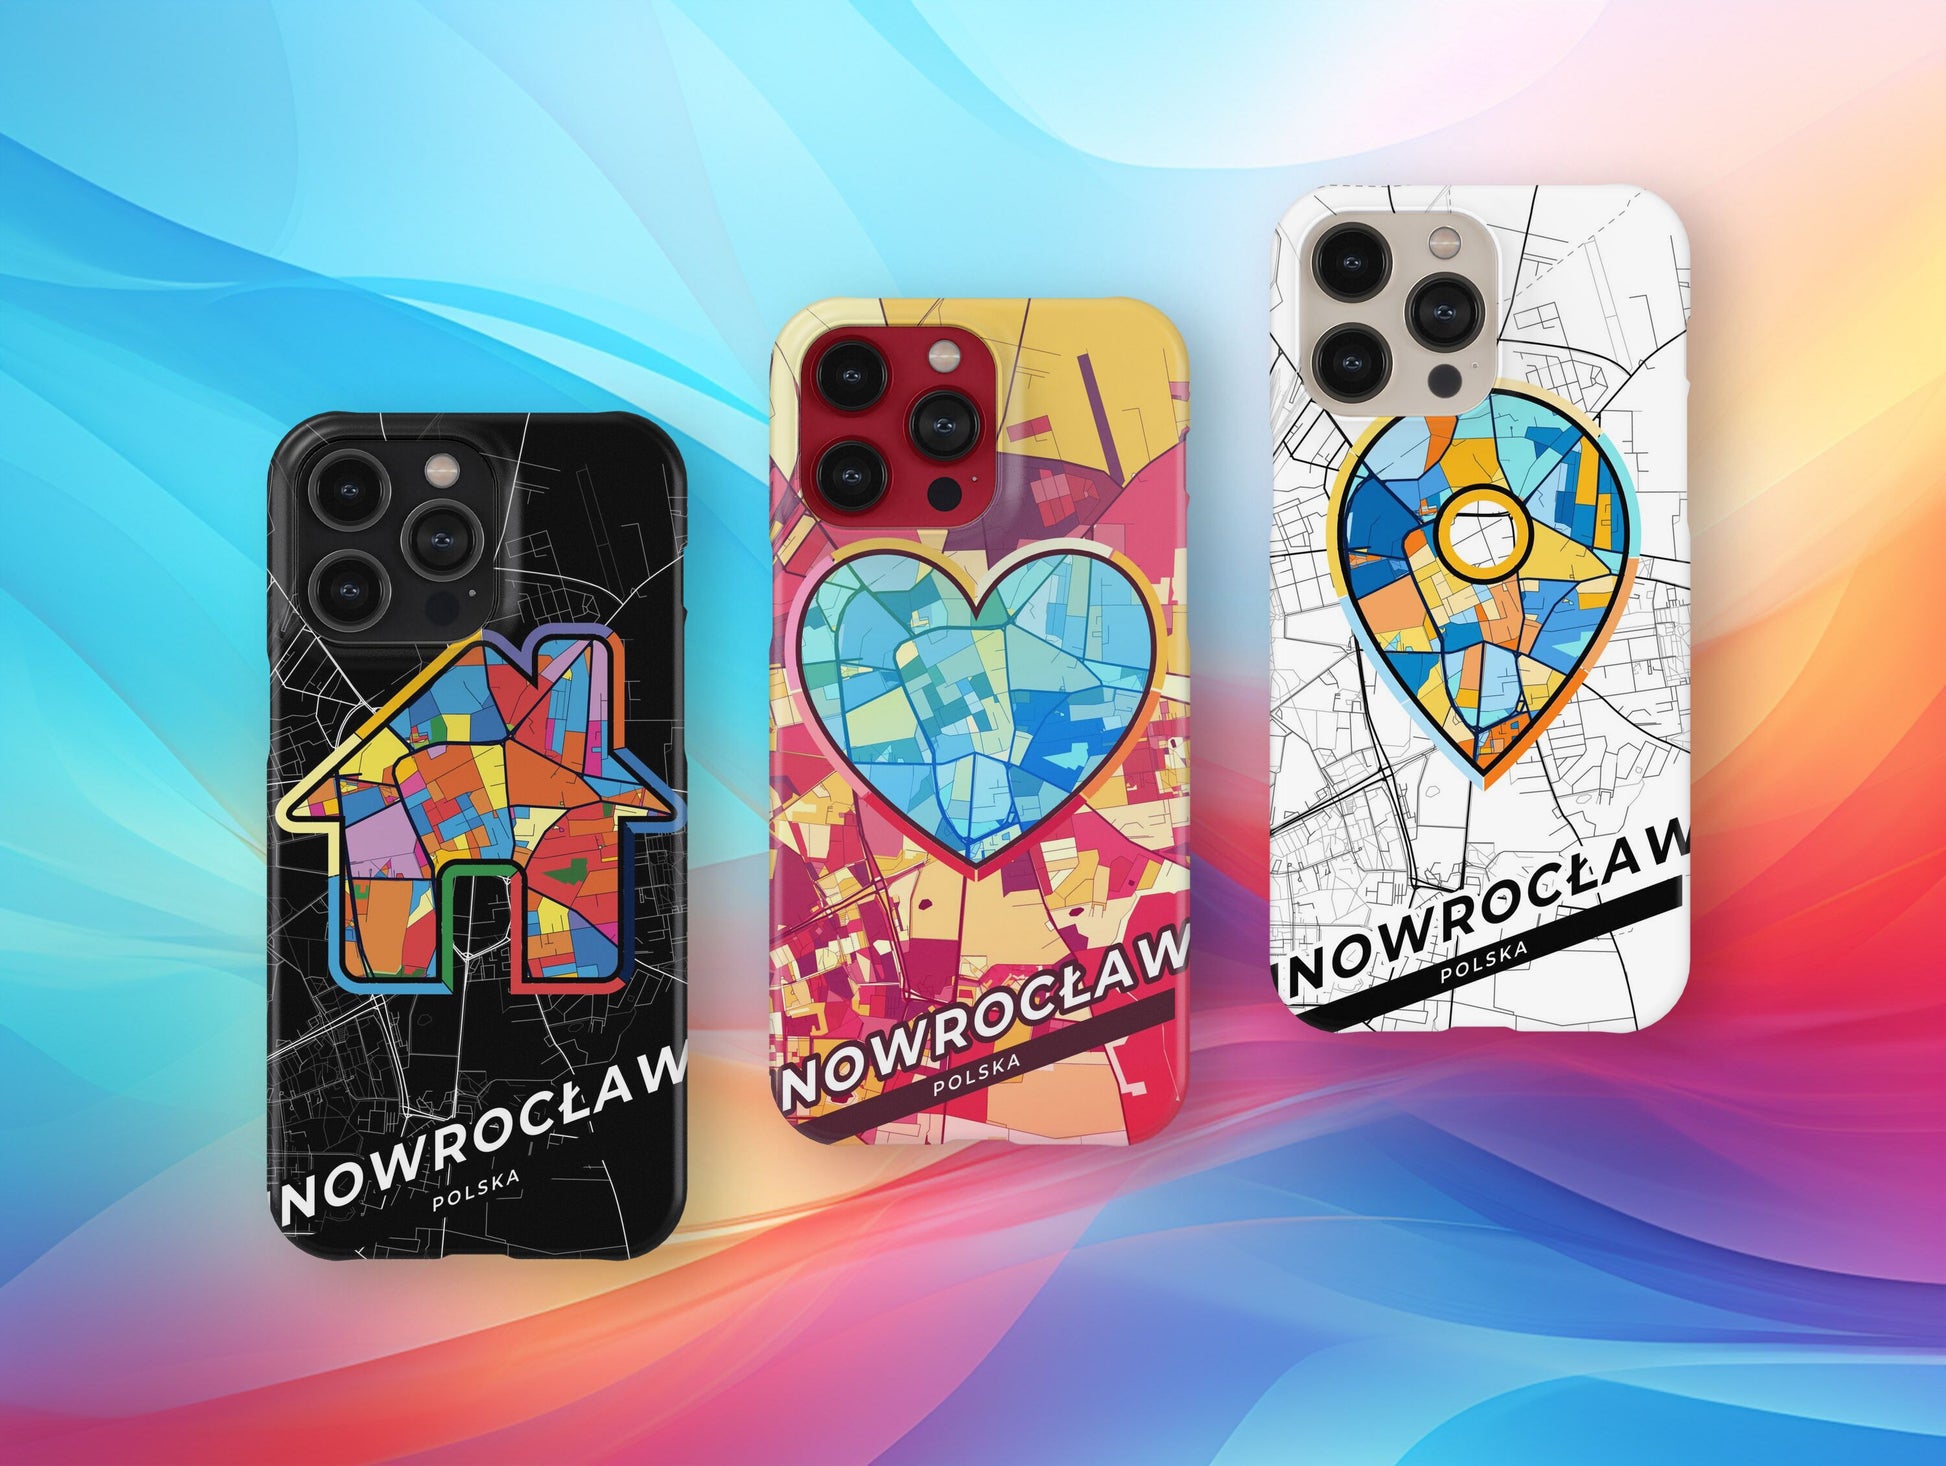 Inowrocław Poland slim phone case with colorful icon. Birthday, wedding or housewarming gift. Couple match cases.